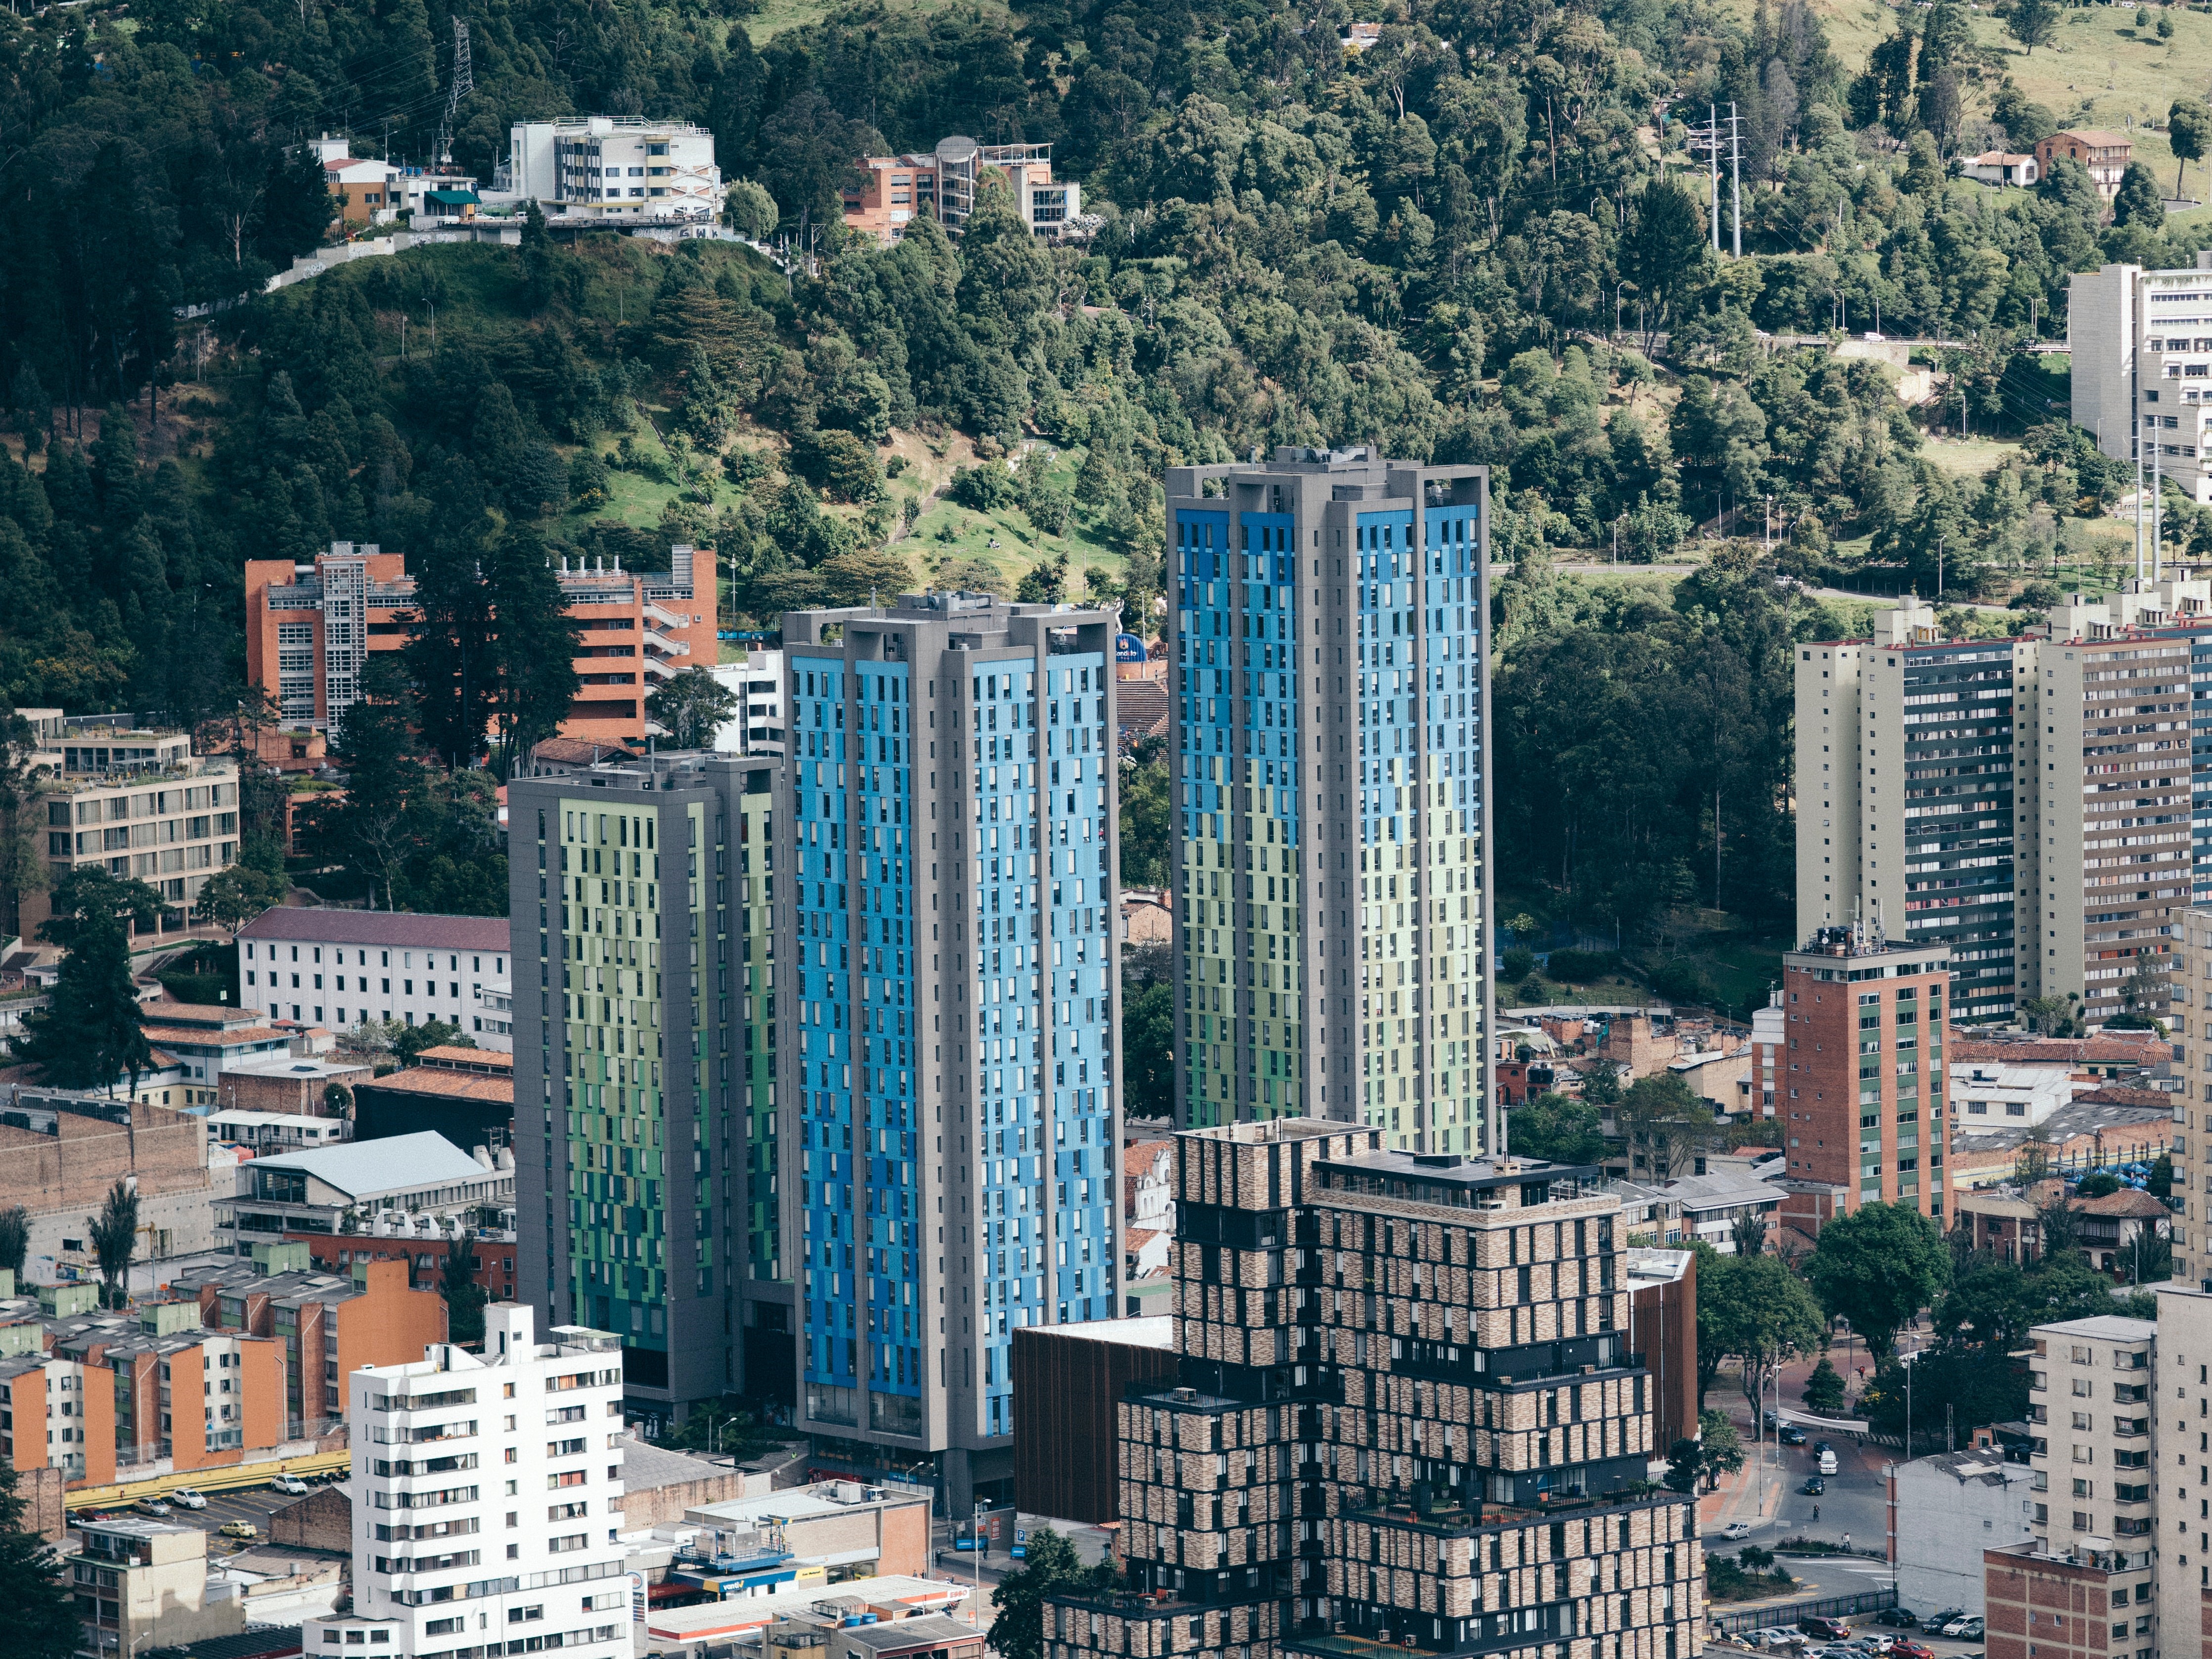 City of urban Bogota with high rise buildings, Colombia